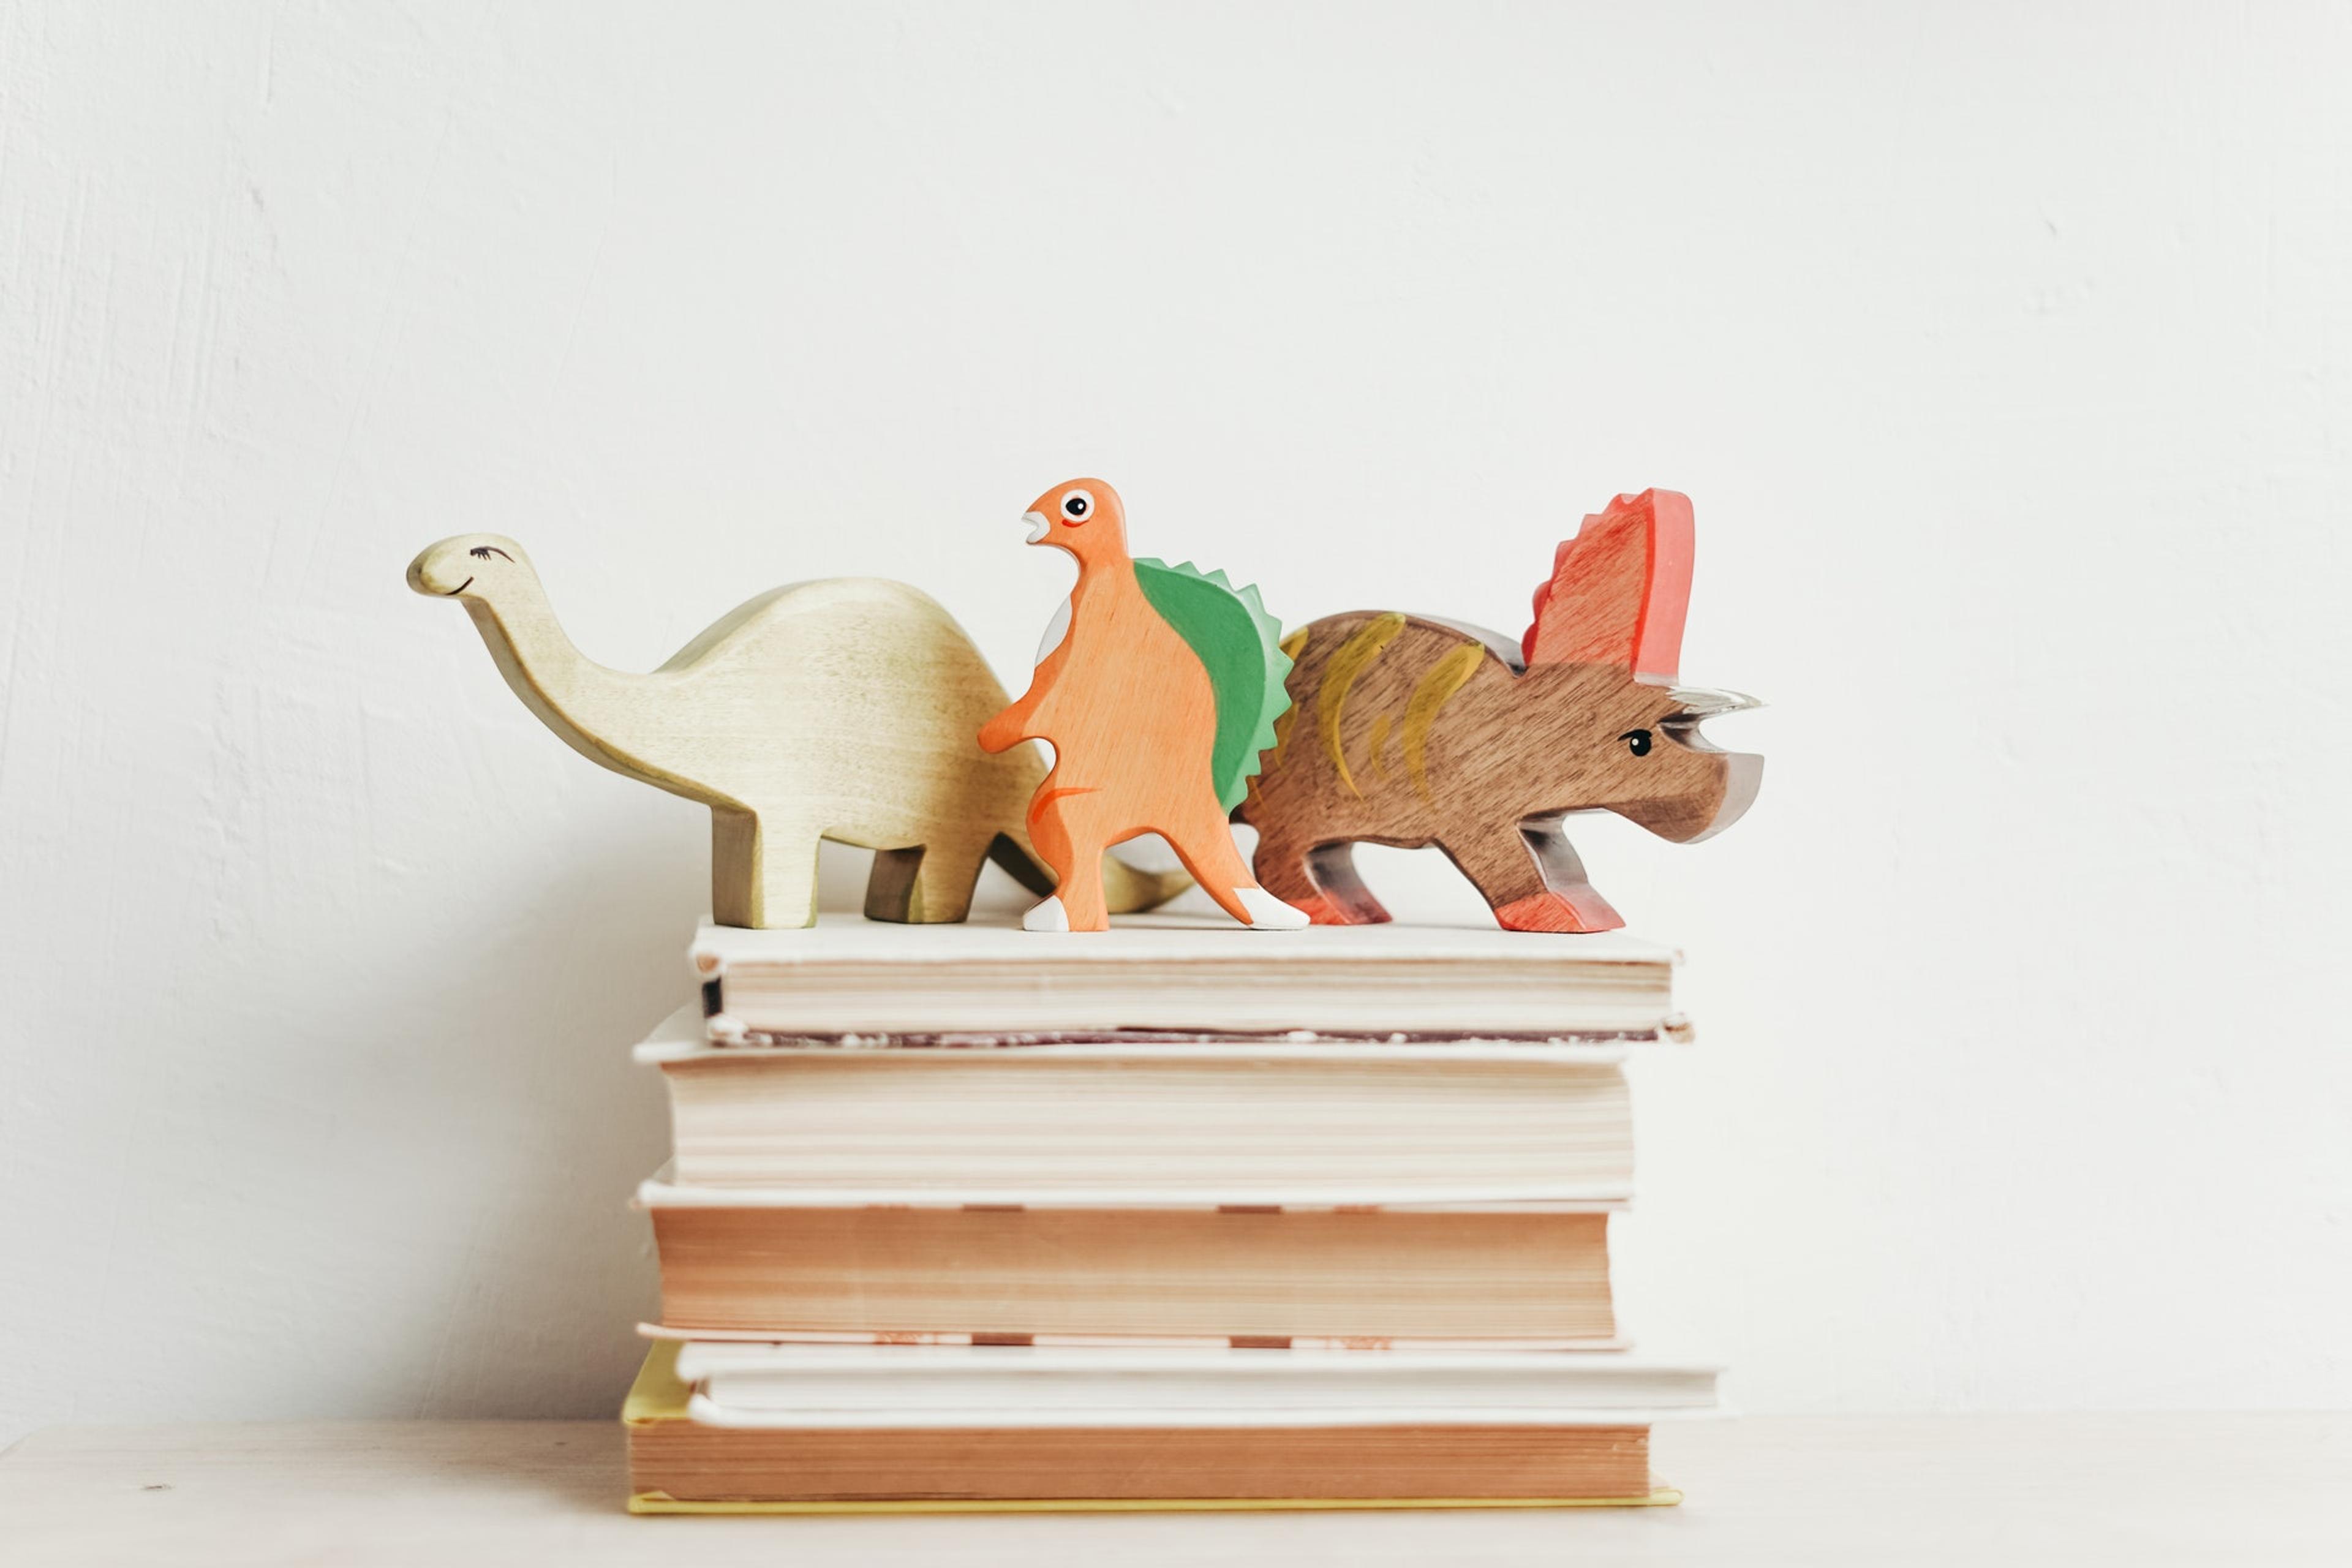 Three wooden dinosaurs atop a stack of books against a white background